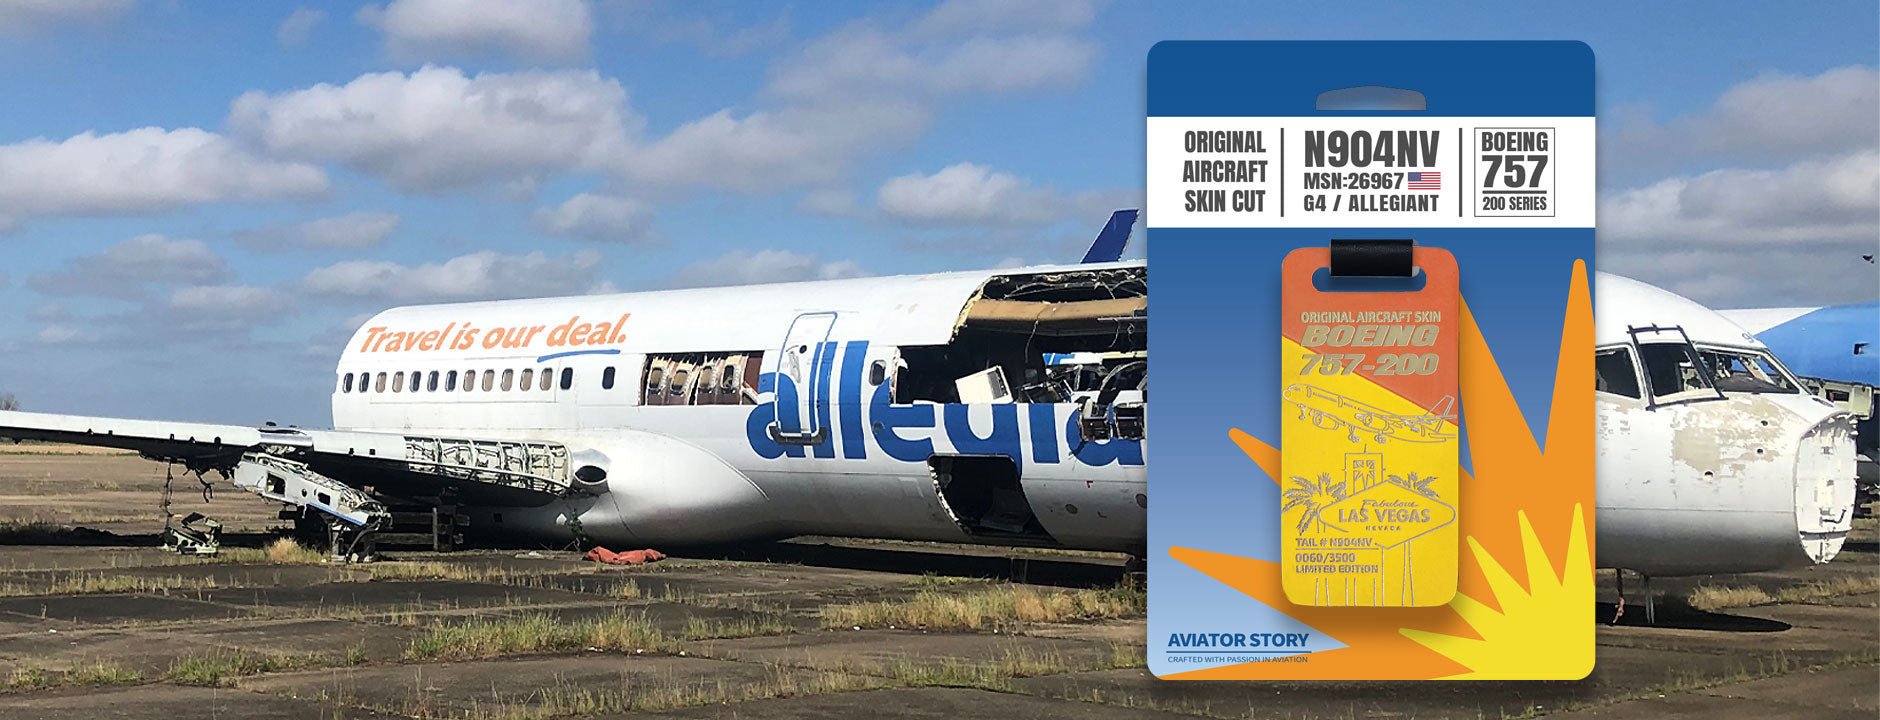 Allegiant Boeing 757 Plane Skin Tag. Aviation tag carries history of aviation. Handcrafted plane tag. Gift for pilot crew aviation lovers.